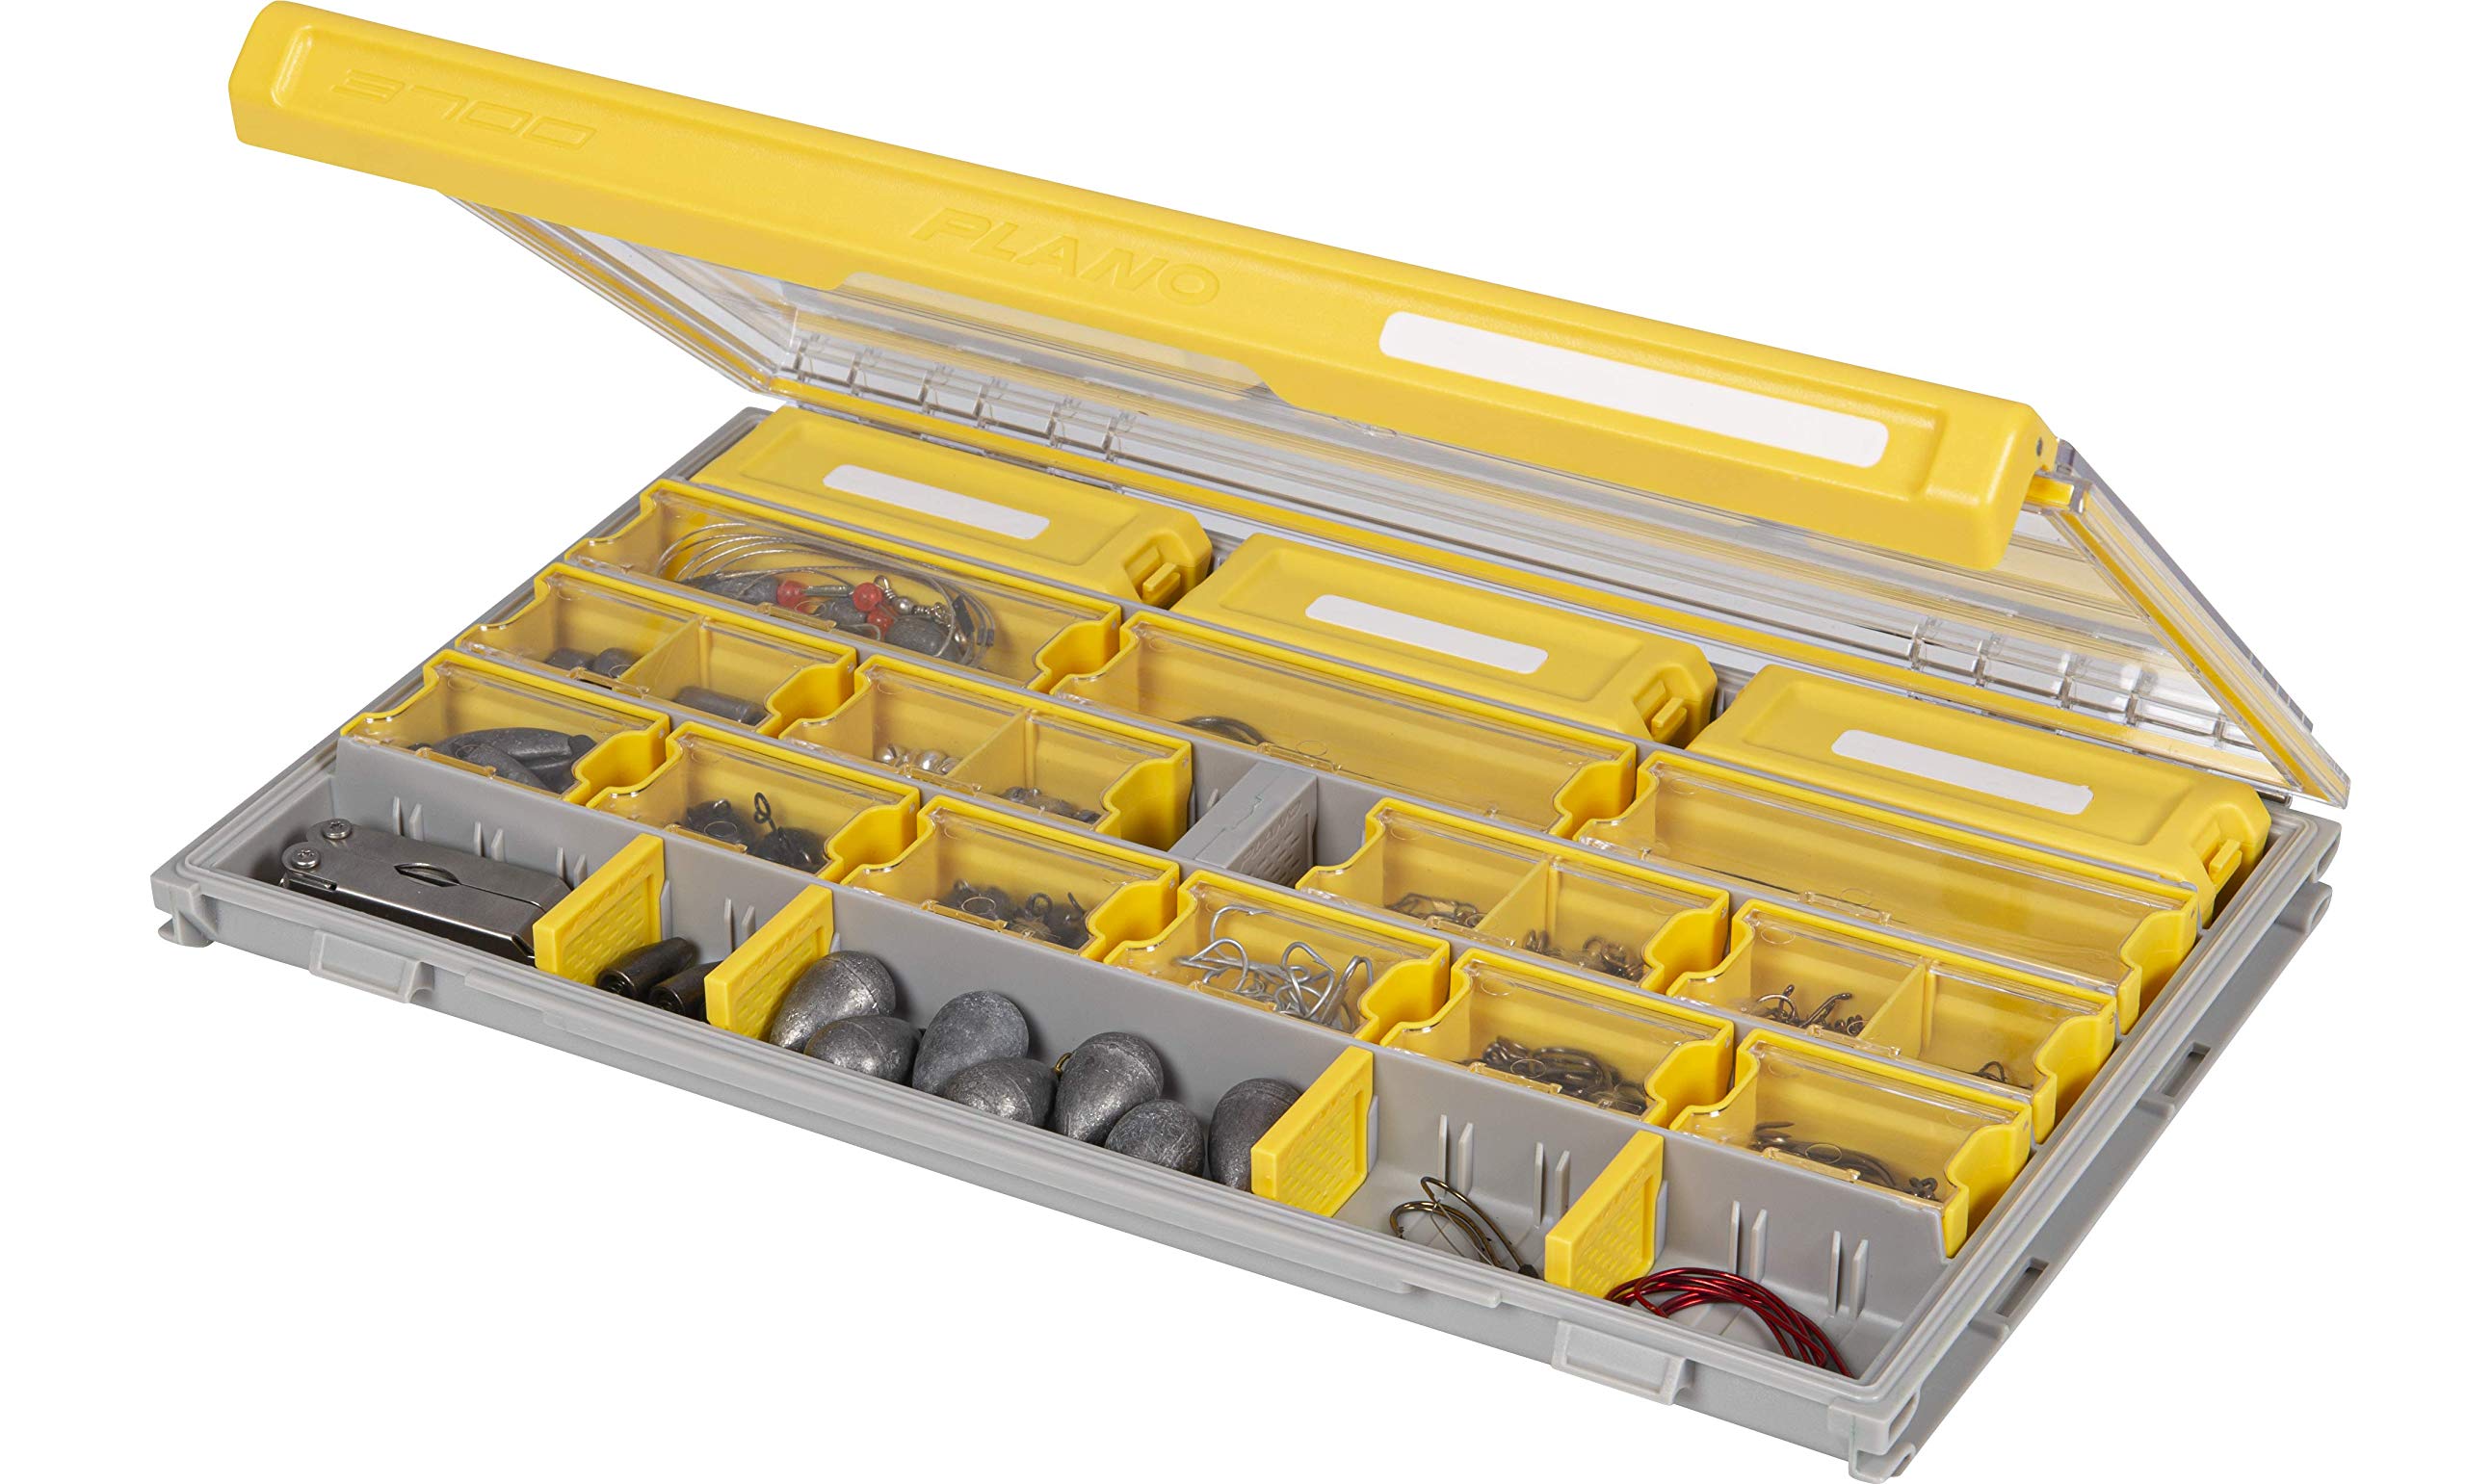 Plano Edge Flex 3600 Tackle Storage, Includes 38 Flex Dividers, Gray and  Yellow, Customizable Waterproof Tackle Box Organization, Rustrictor  Rust-Resistant Technology : : Sports & Outdoors